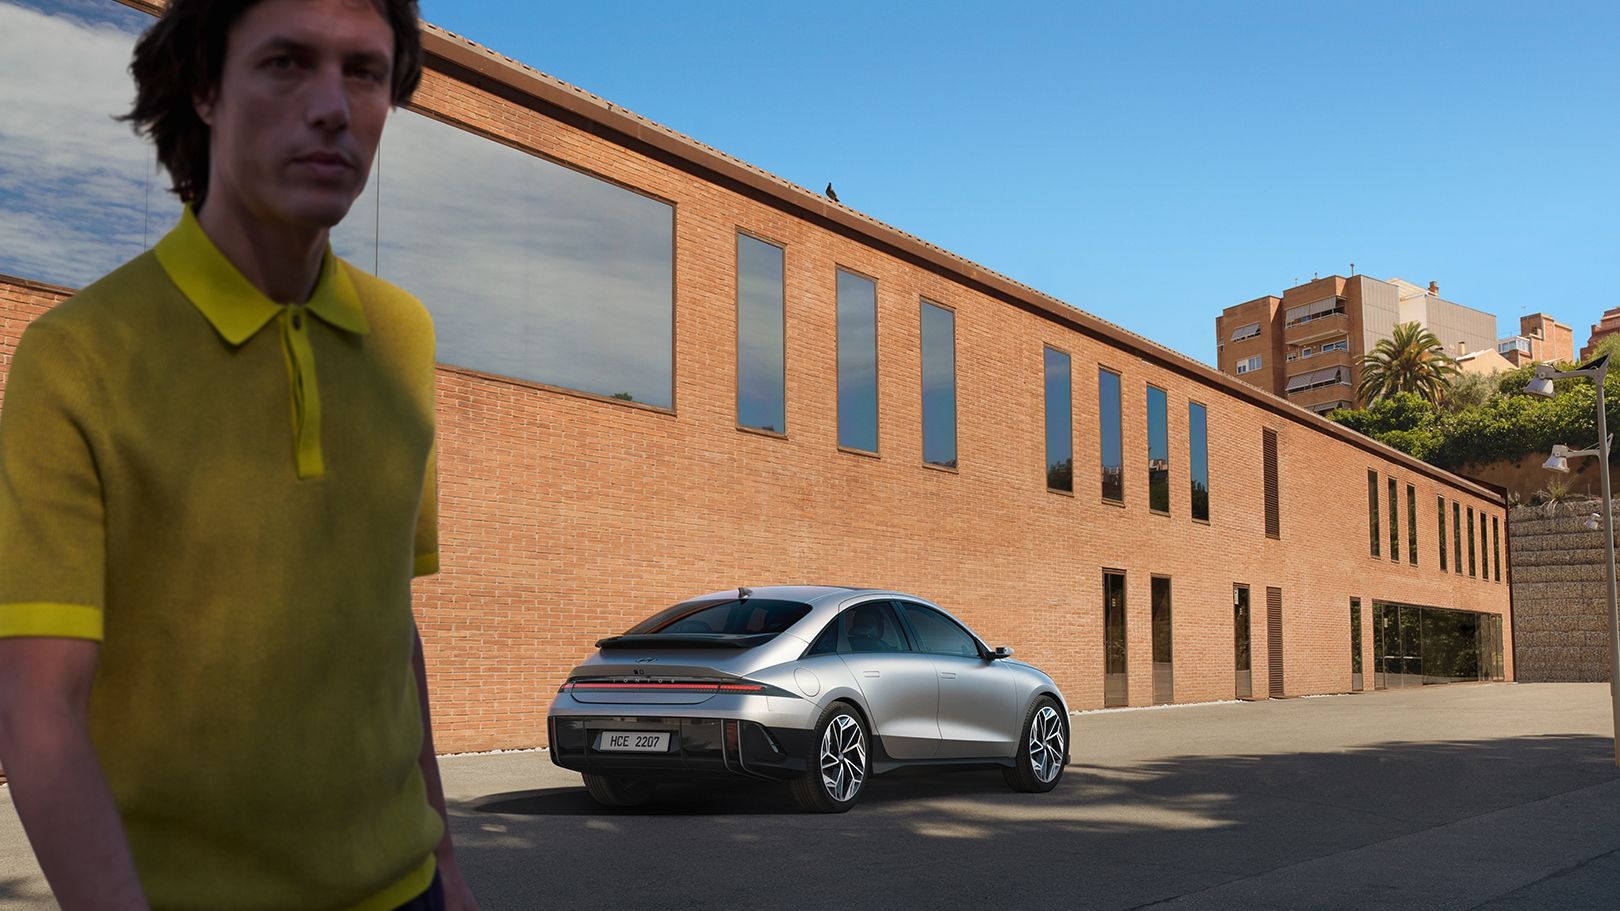 IONIQ 6 rear right quarter view with man in yellow shirts